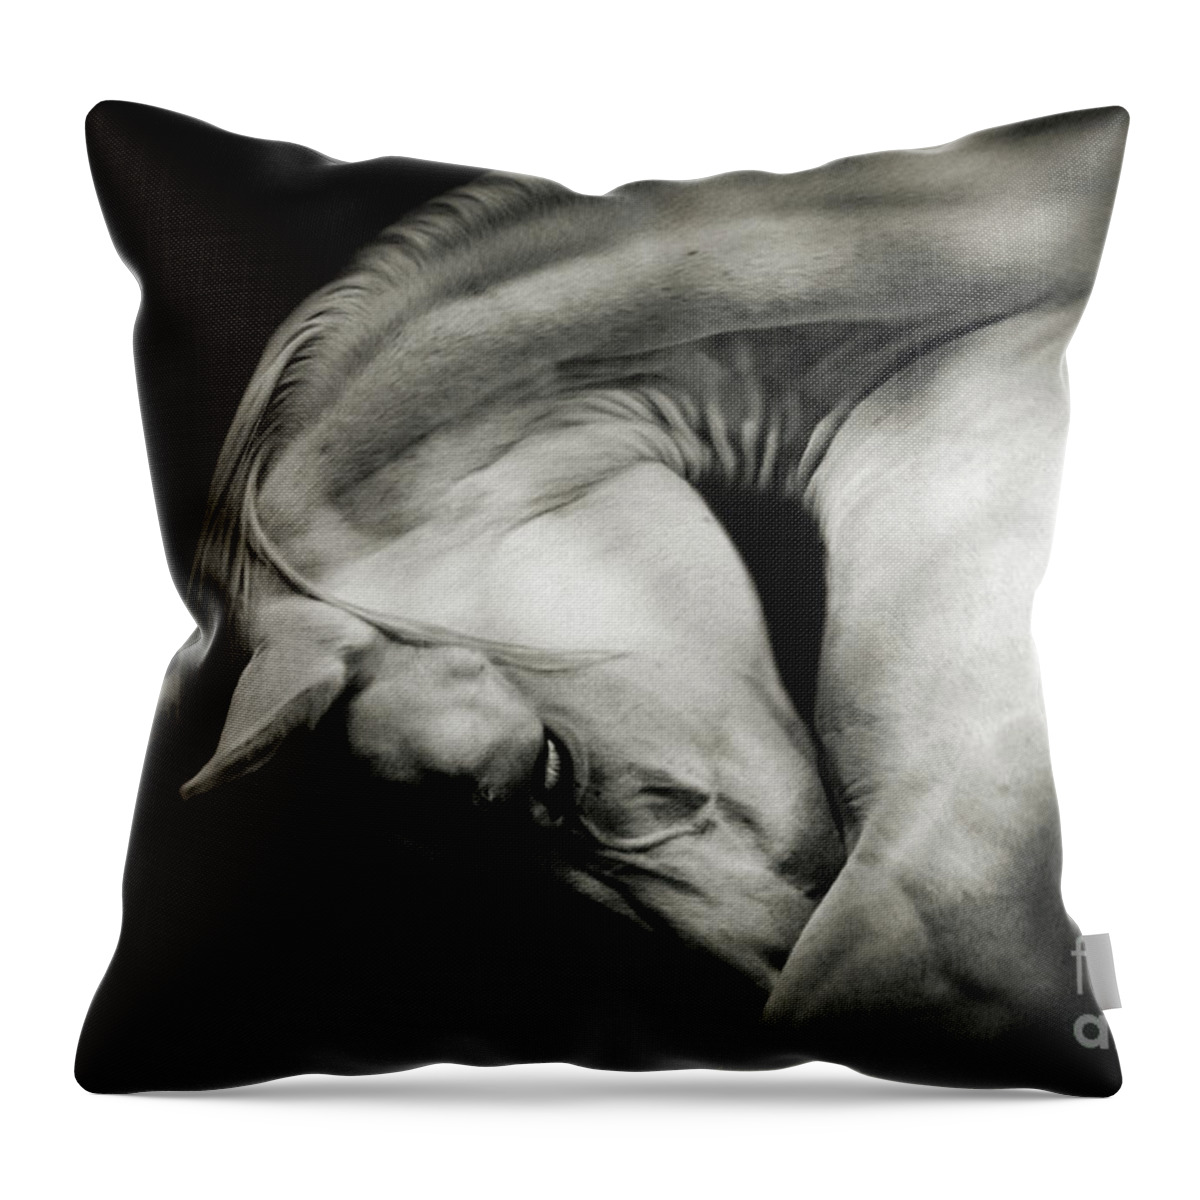 Horse Throw Pillow featuring the photograph White Horse Sensual Portrait On Black Background by Dimitar Hristov